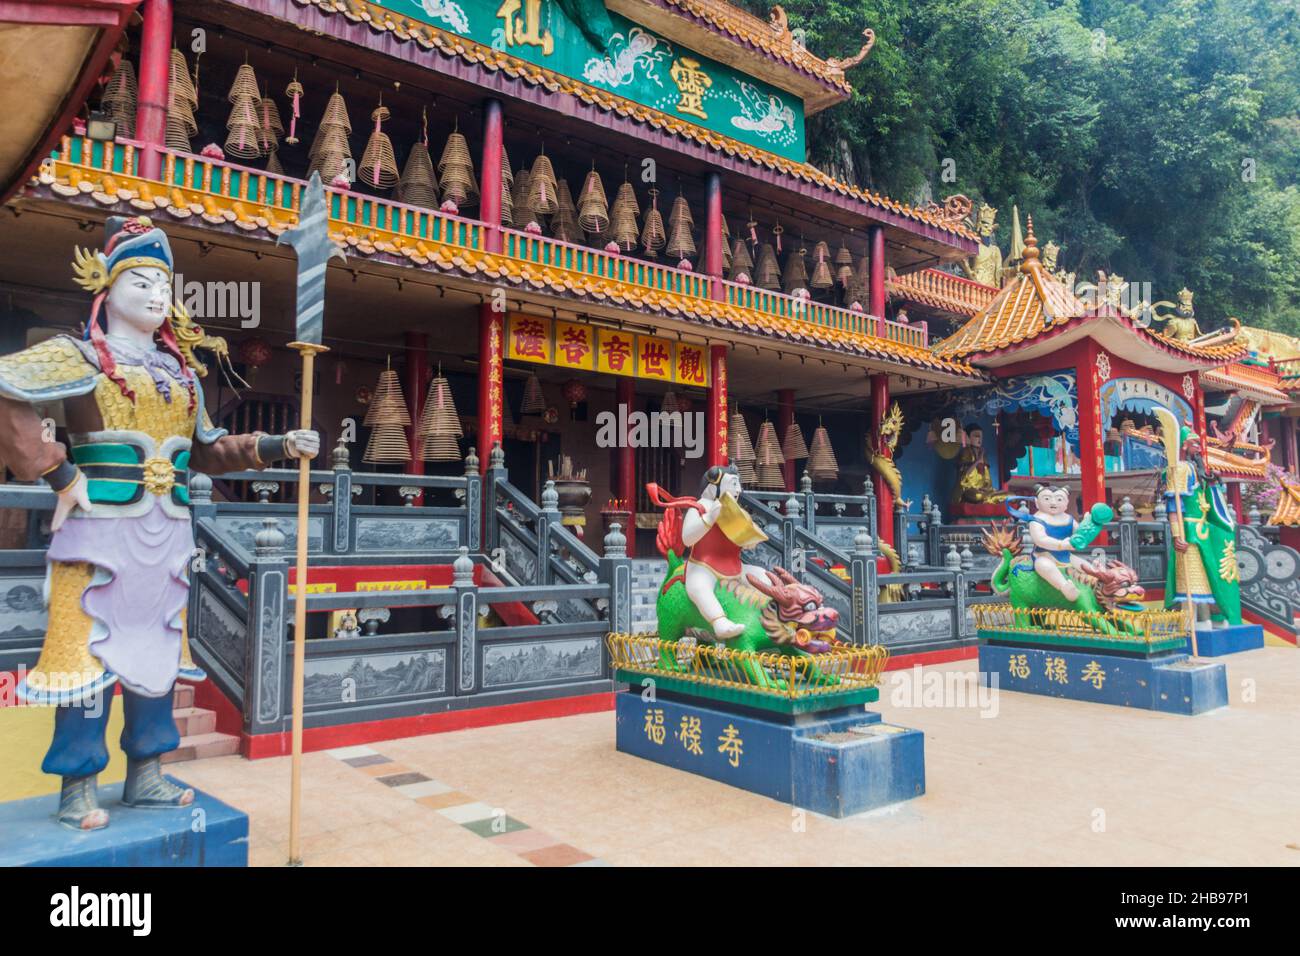 IPOH, MALAYASIA - MARCH 25, 2018: Ling Sen Tong Temple in Ipoh, Malaysia. Stock Photo